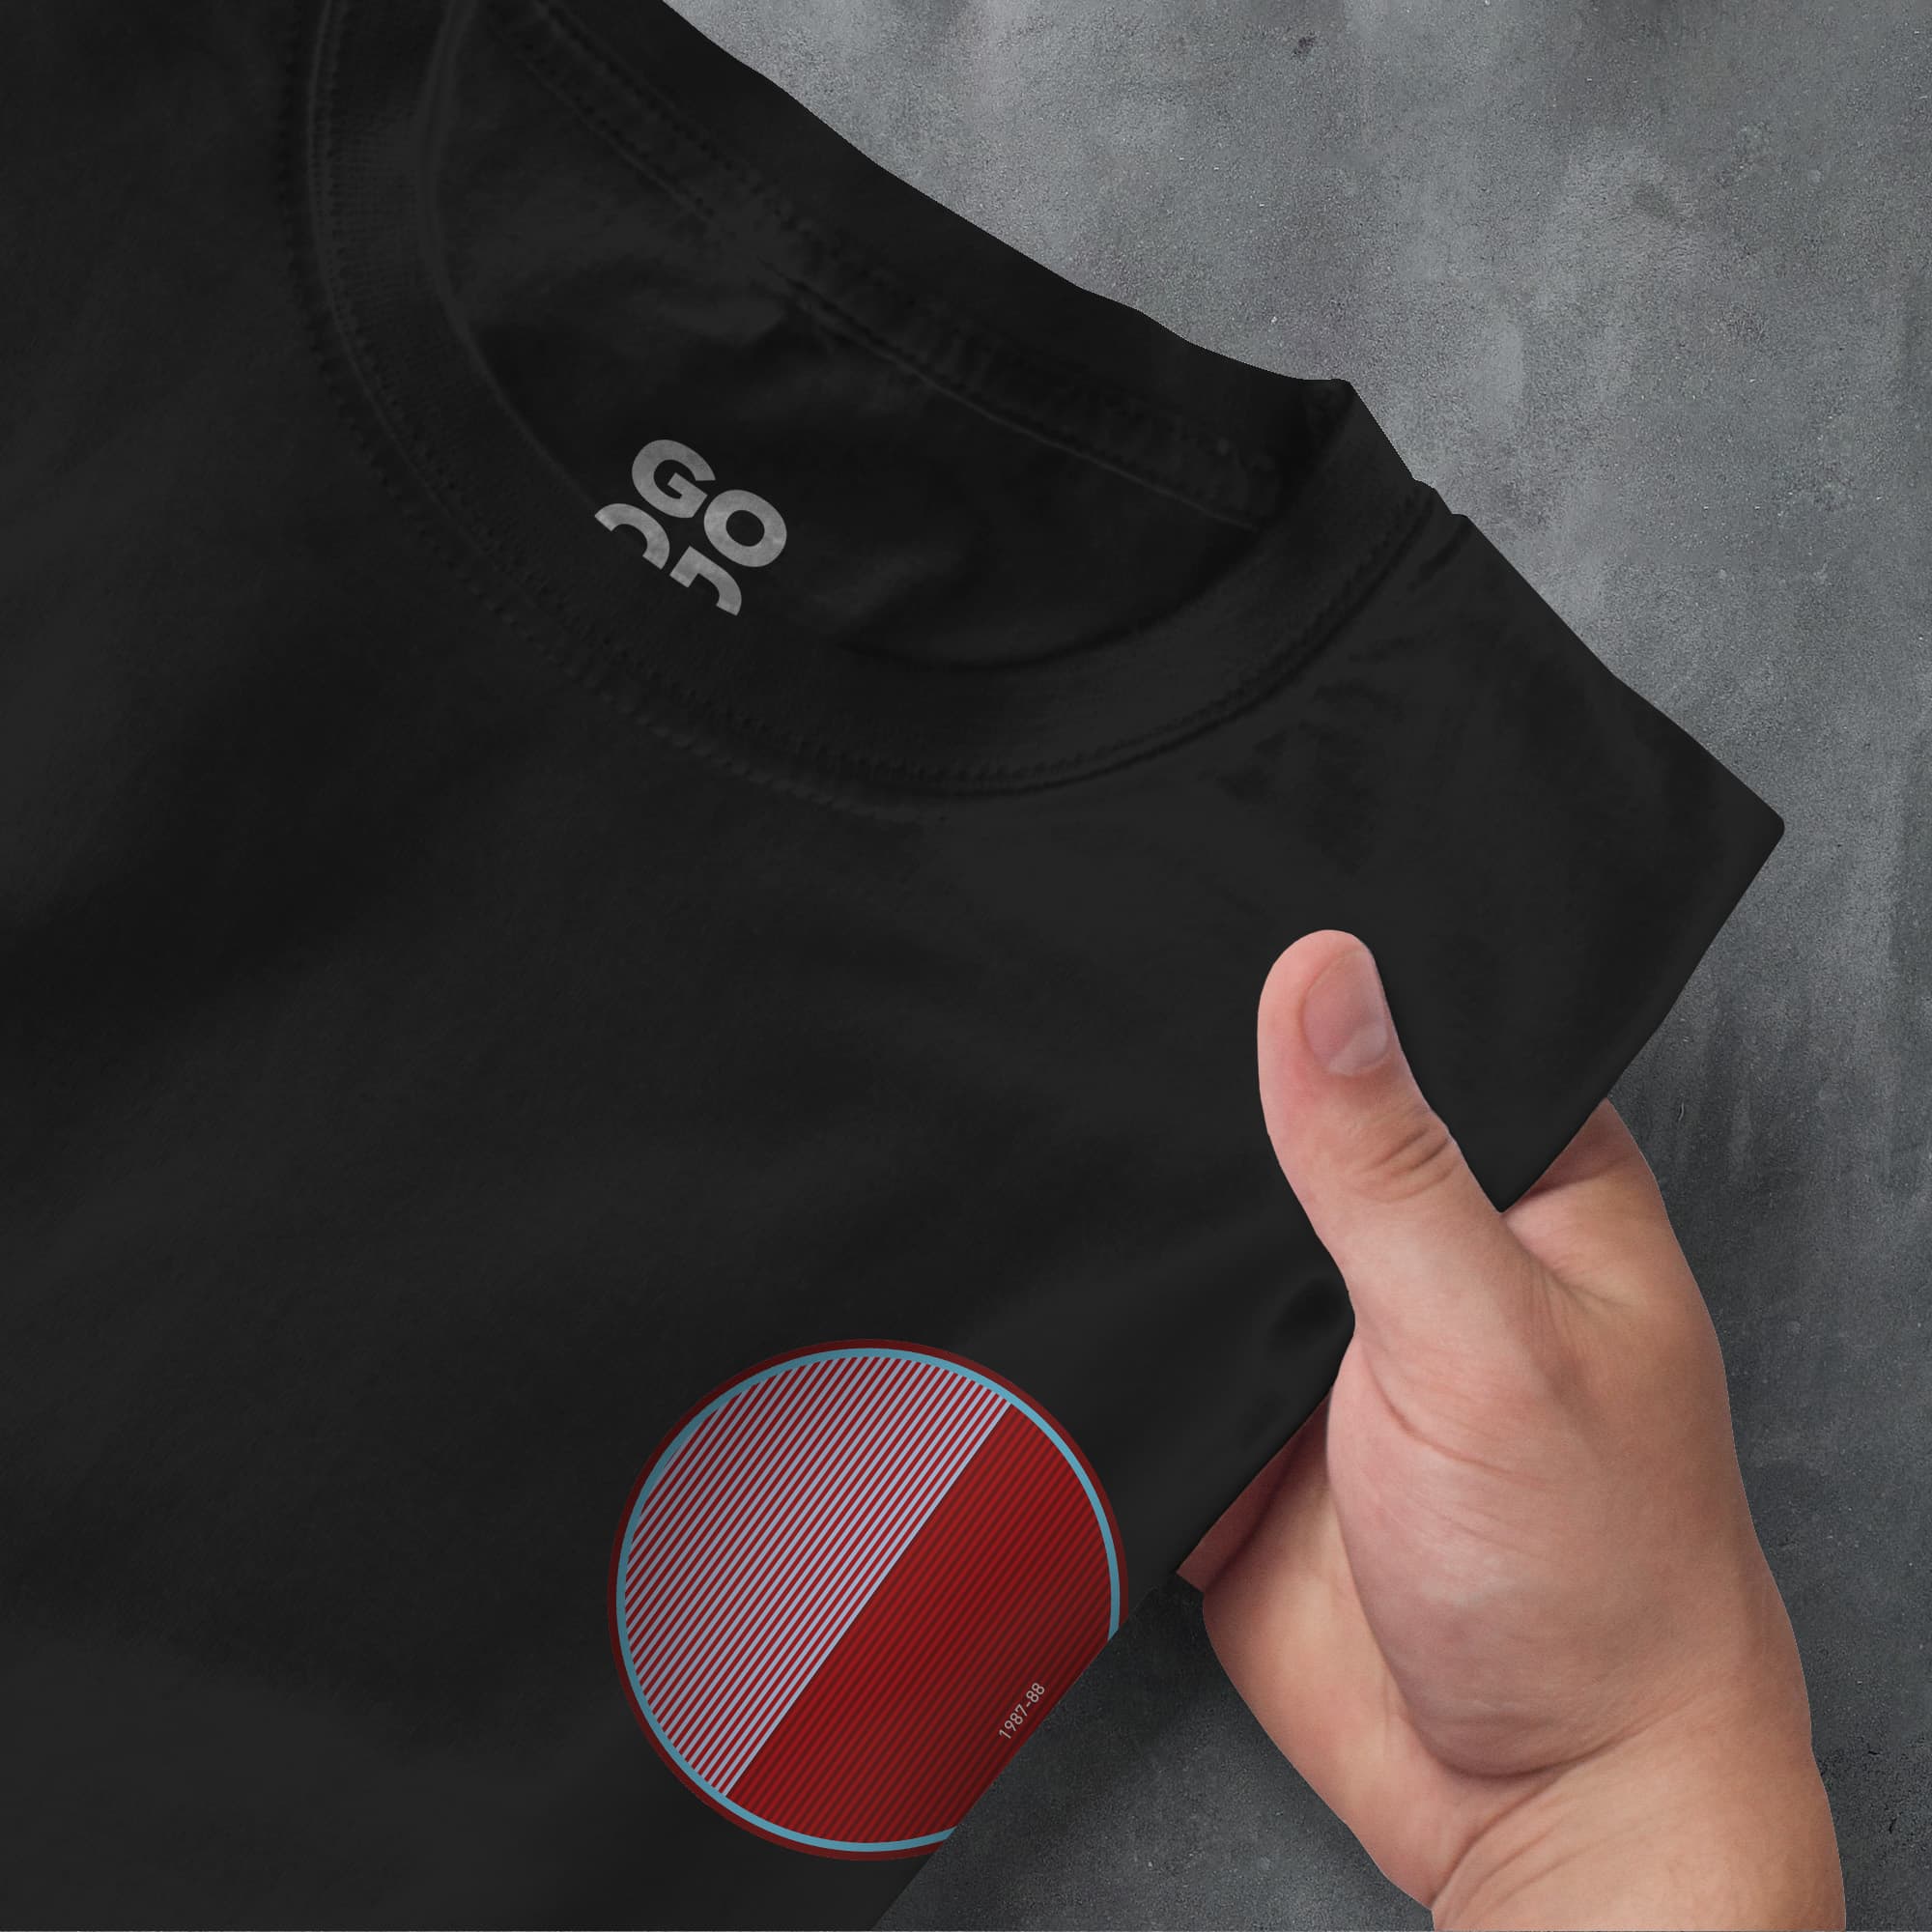 a person's hand pointing at a black shirt with a red circle on it